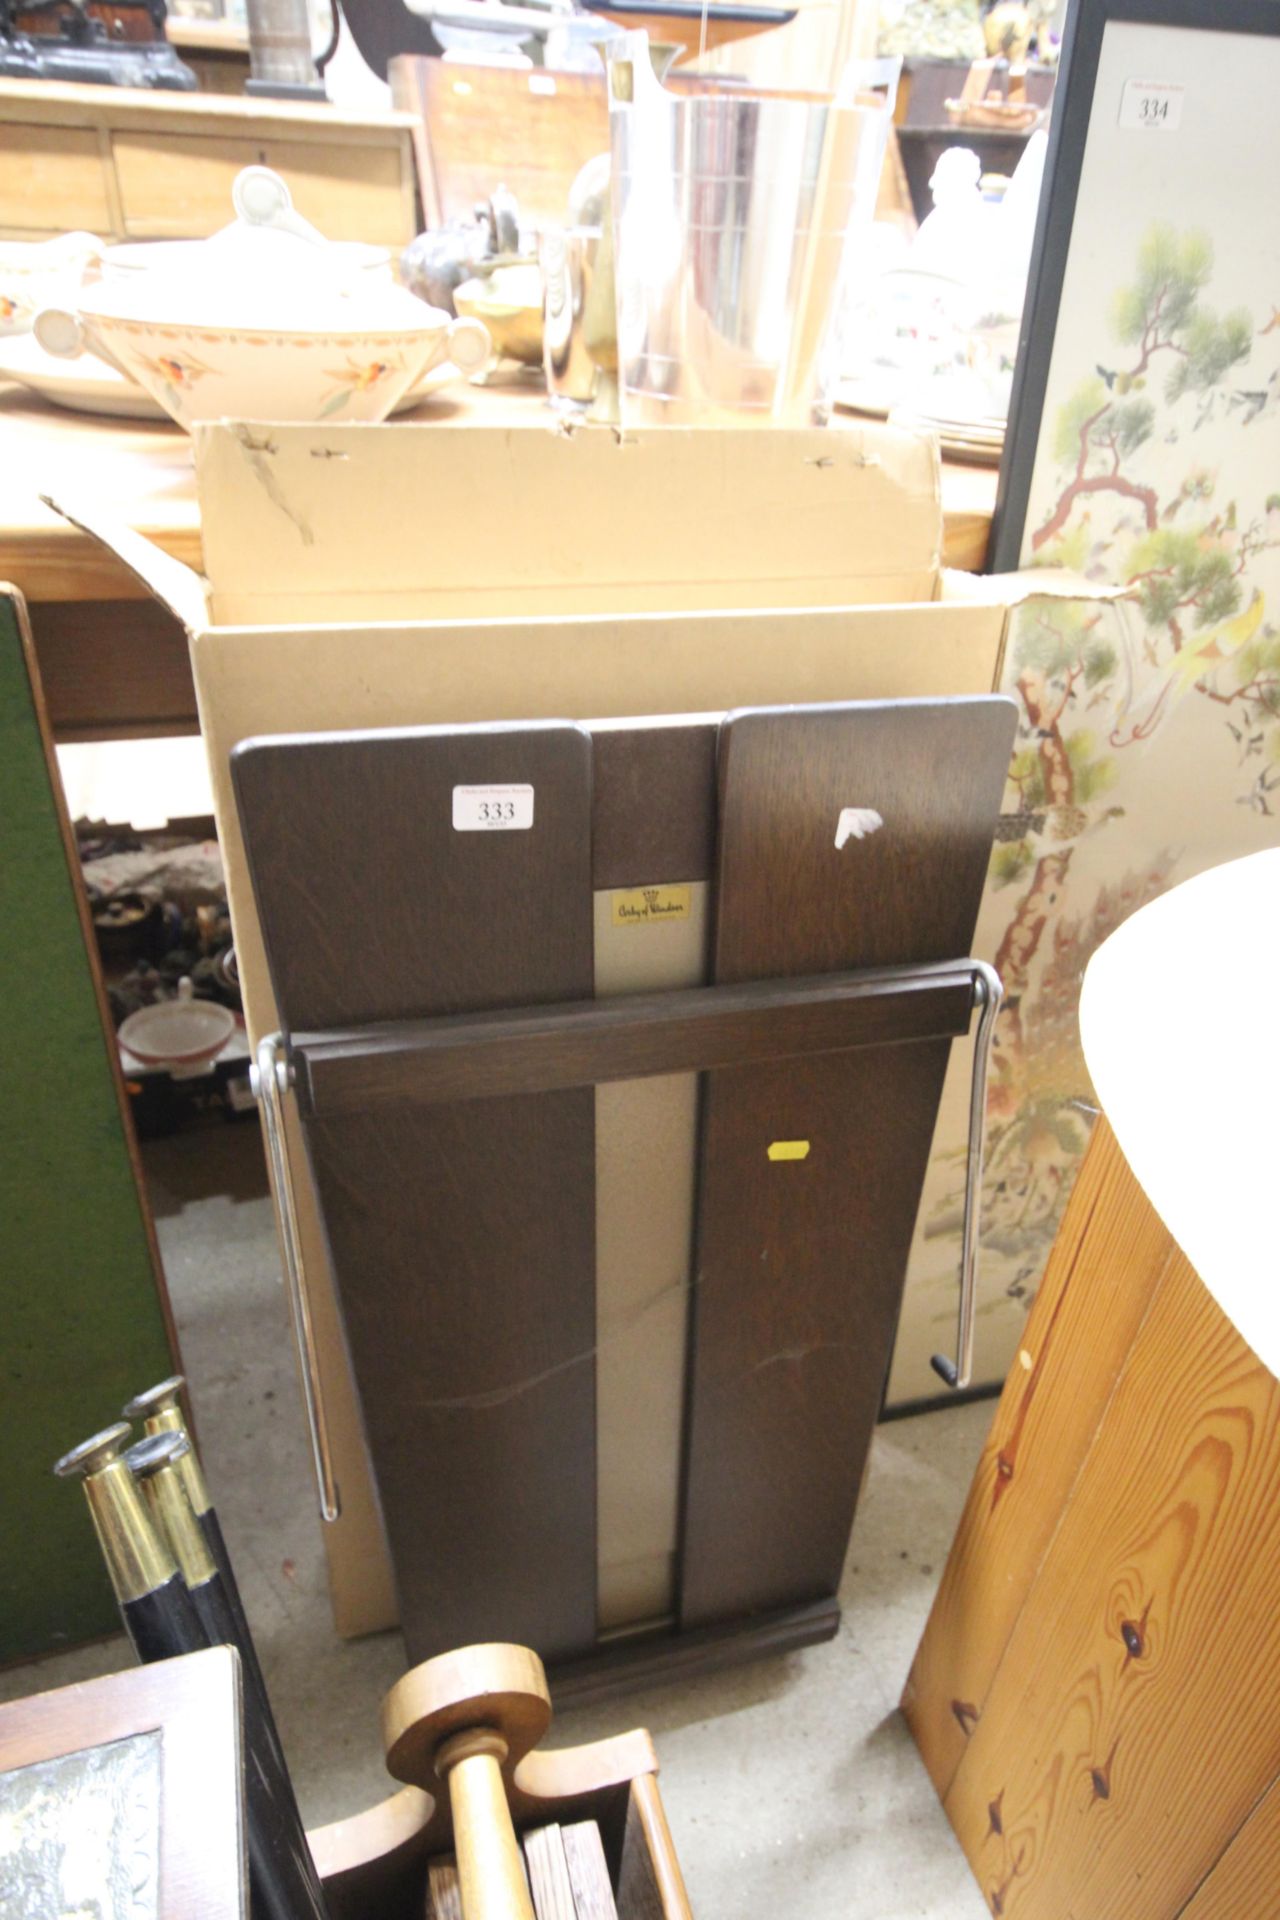 A Corby of Windsor trouser press with original box